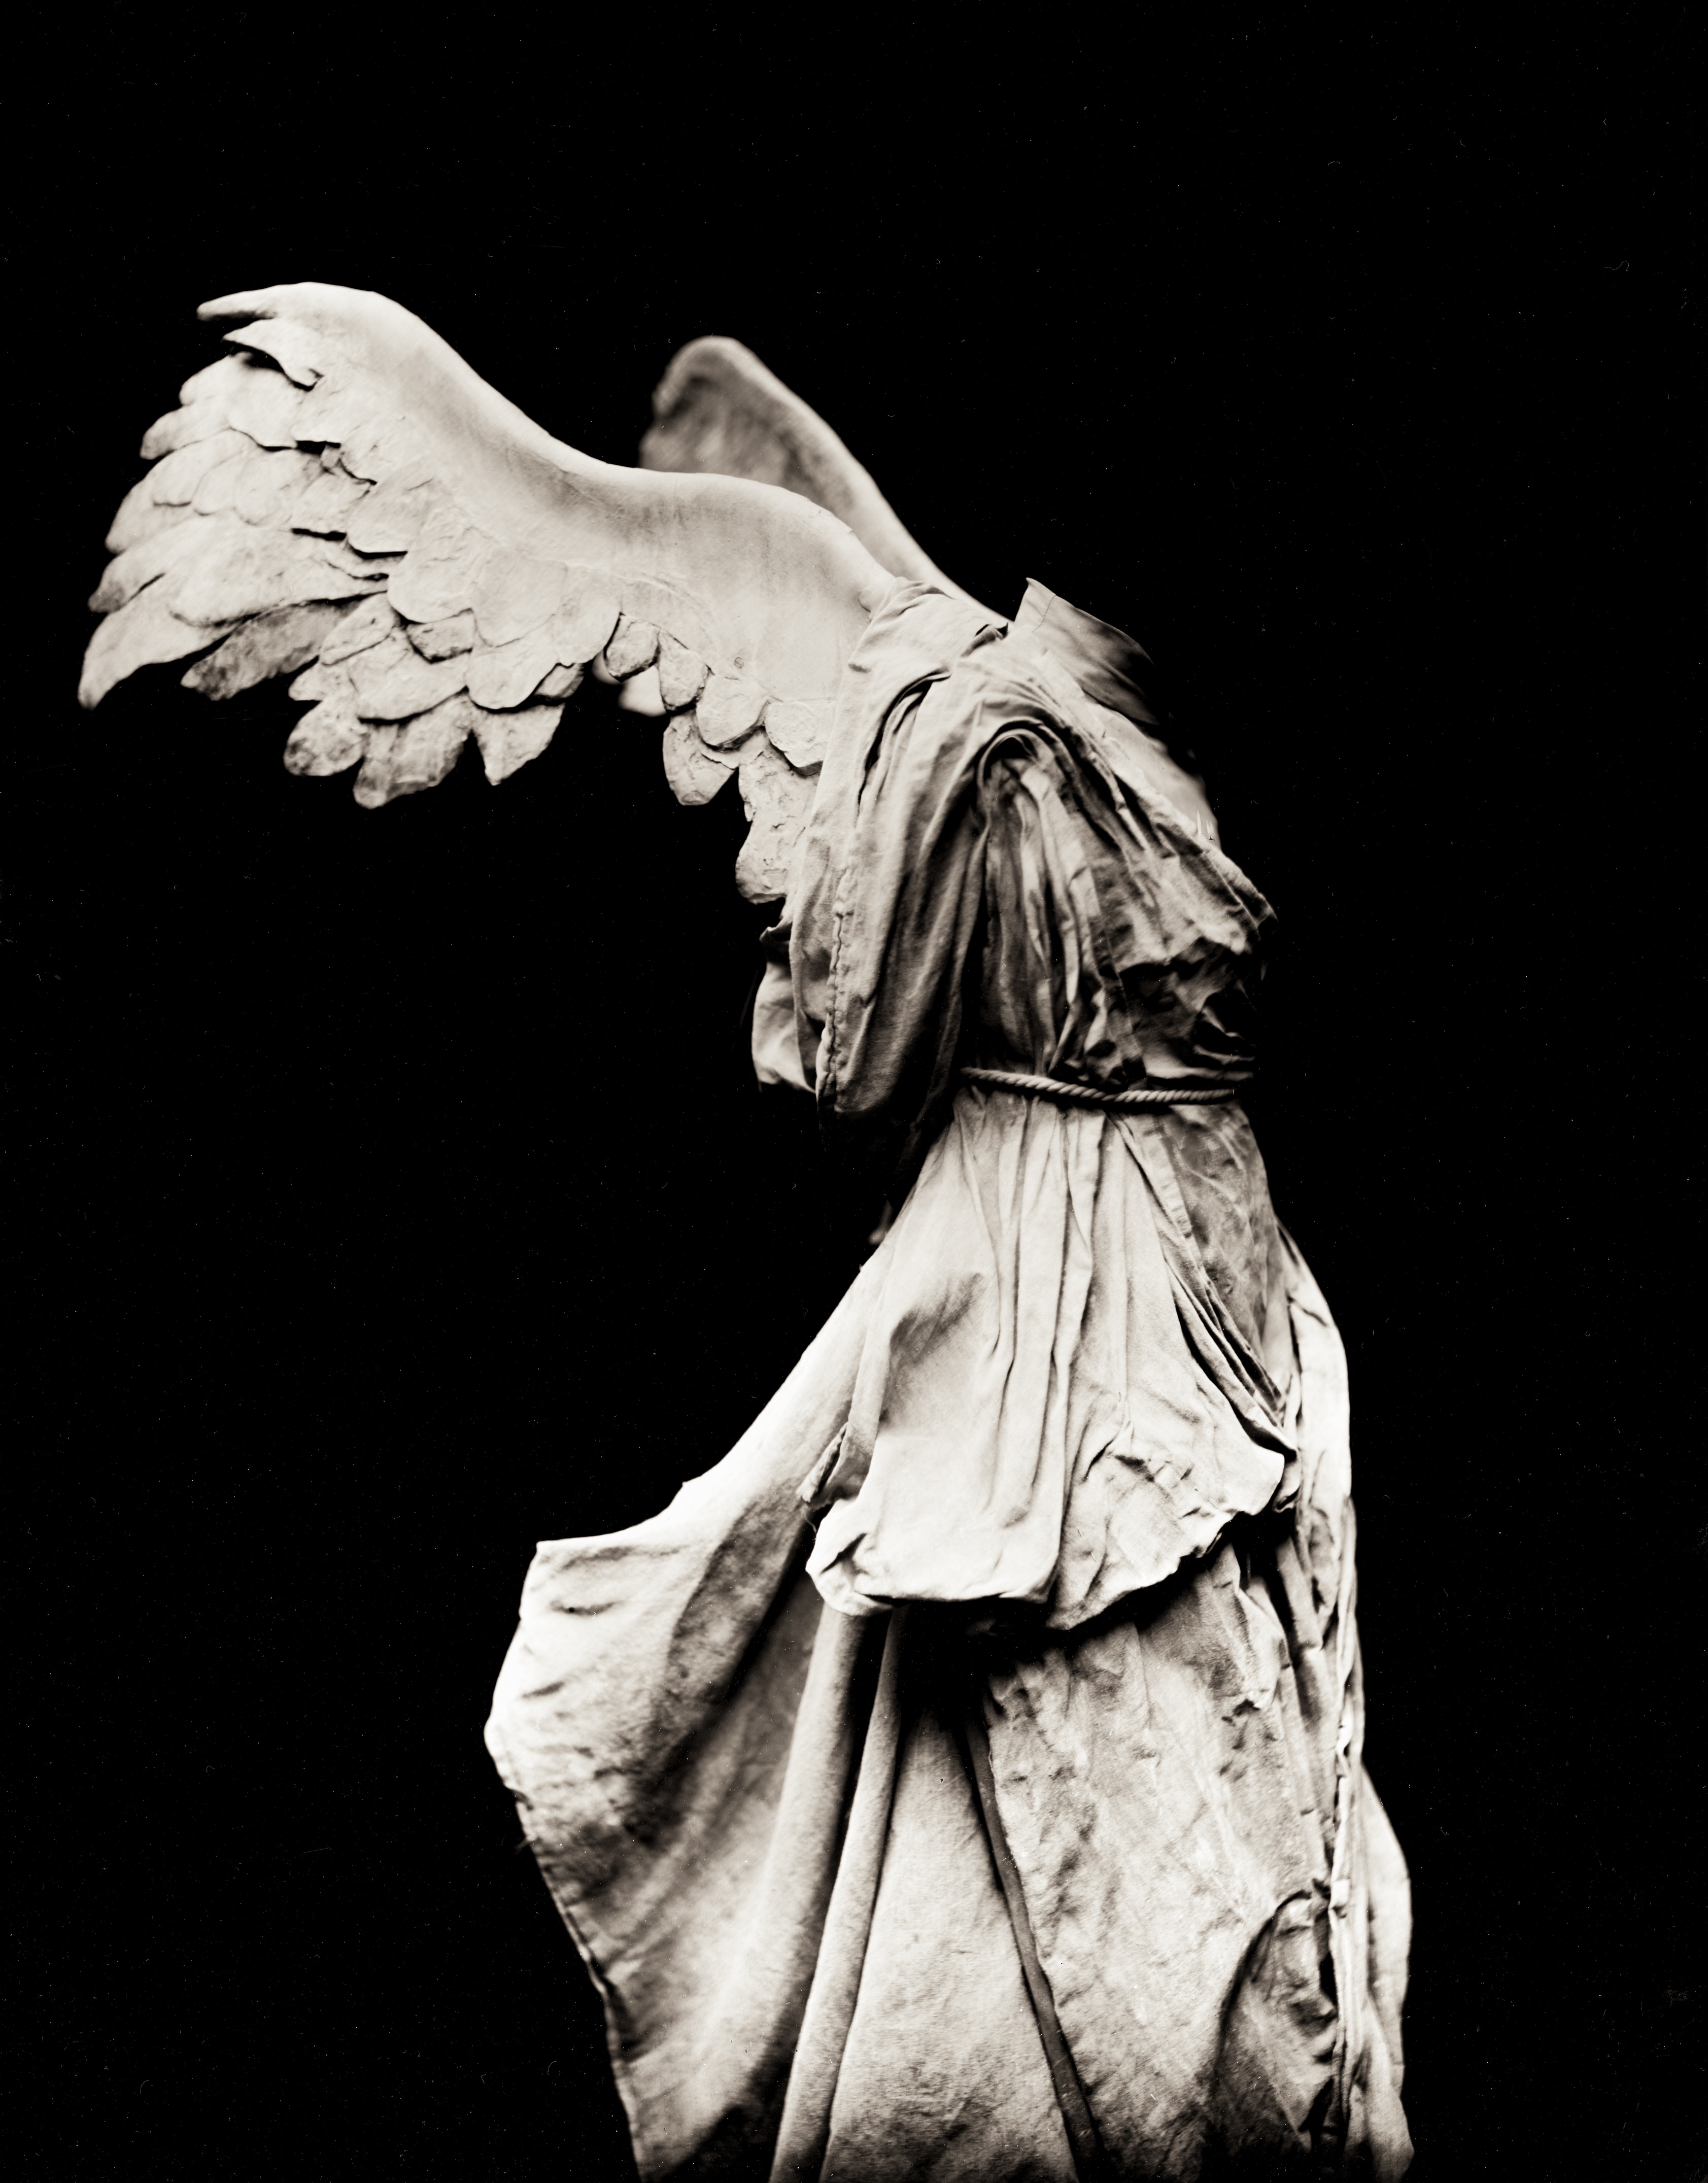 69-Bonnie Jean Balkowitsch - Winged Victory Of Samothrace 9-17-2022 #4399 (Low Resolution) - Shane Balkowitsch